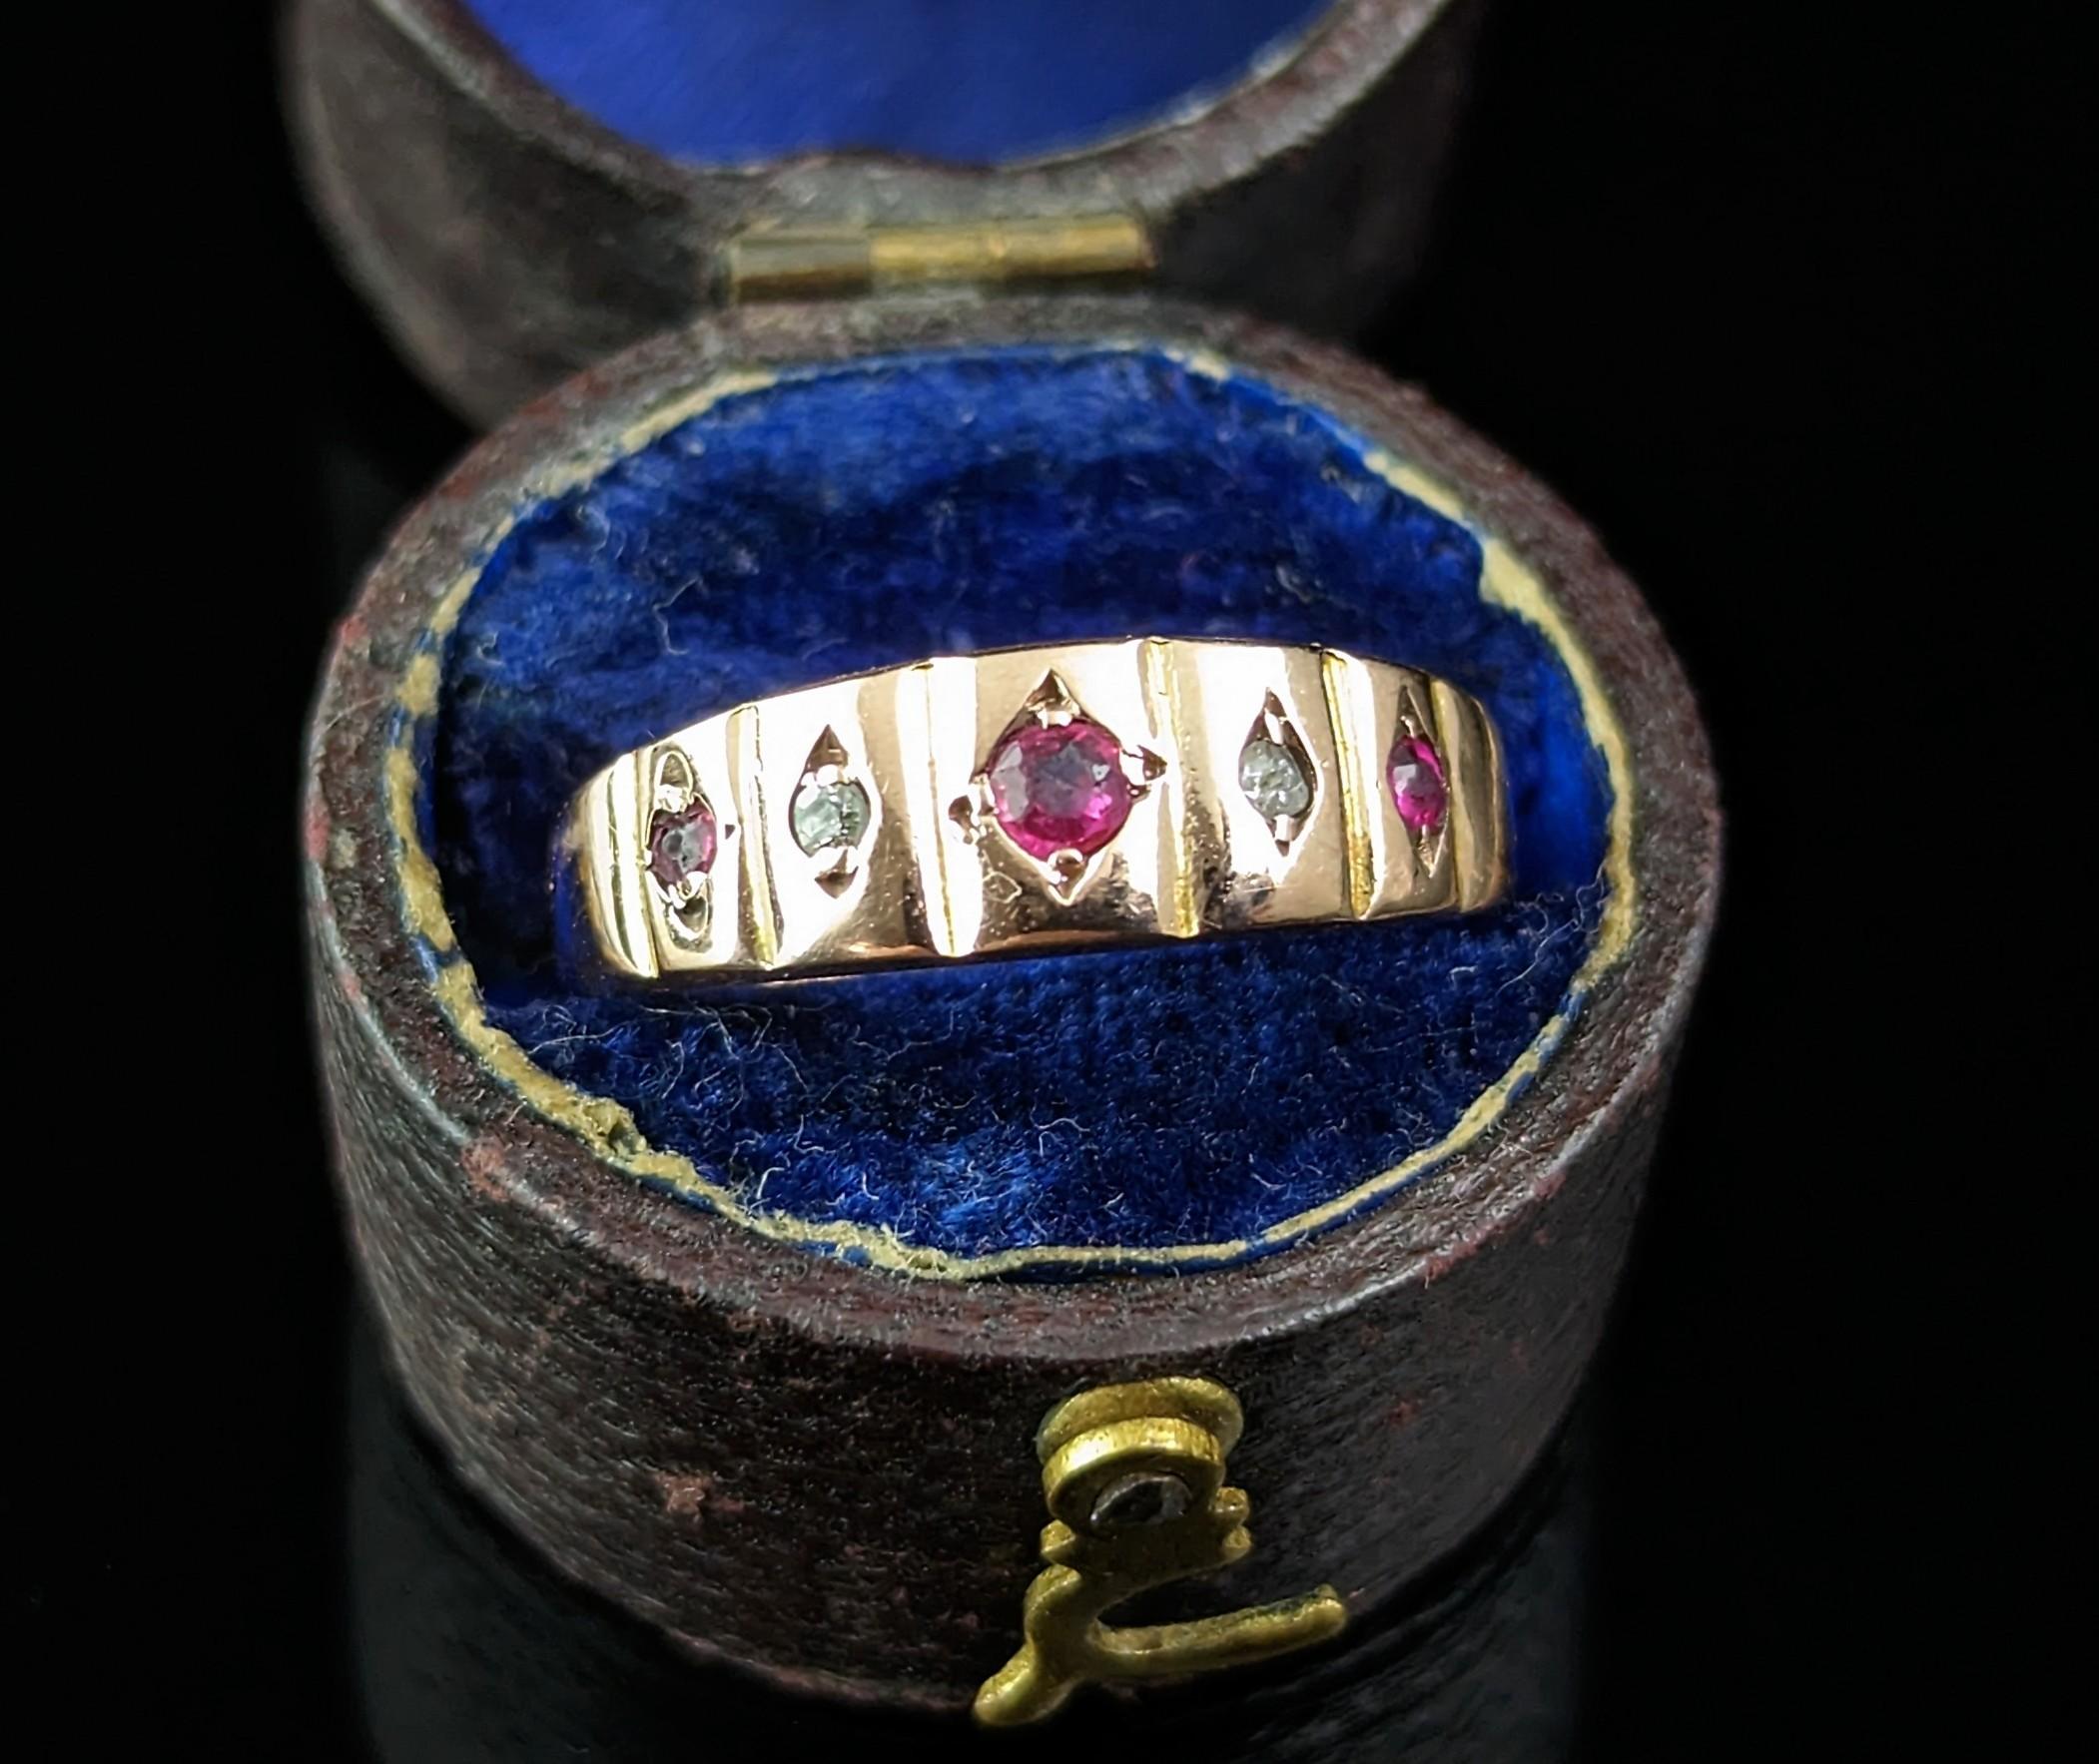 A gorgeous antique early Art Deco era Ruby and Diamond ring.

It is a band style ring with five stones, three rich Pinky coloured rubies and two rose cut diamonds, set into diamond shaped settings across the front of the band.

The gold has a lovely